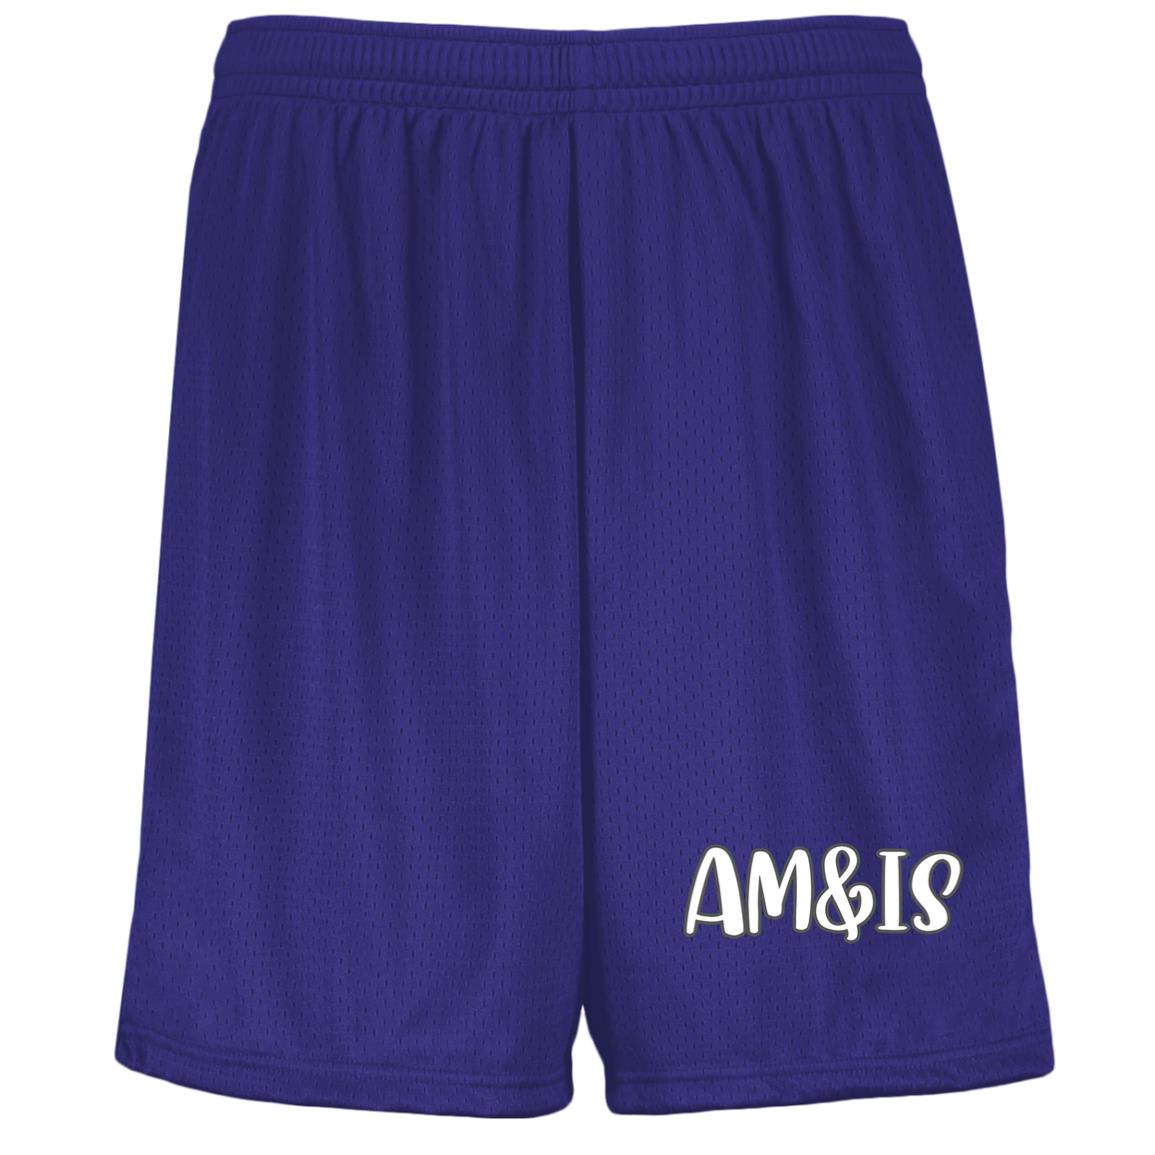 PURPLE - AM&IS Activewear Youth Moisture-Wicking Mesh Shorts - kids shorts at TFC&H Co.